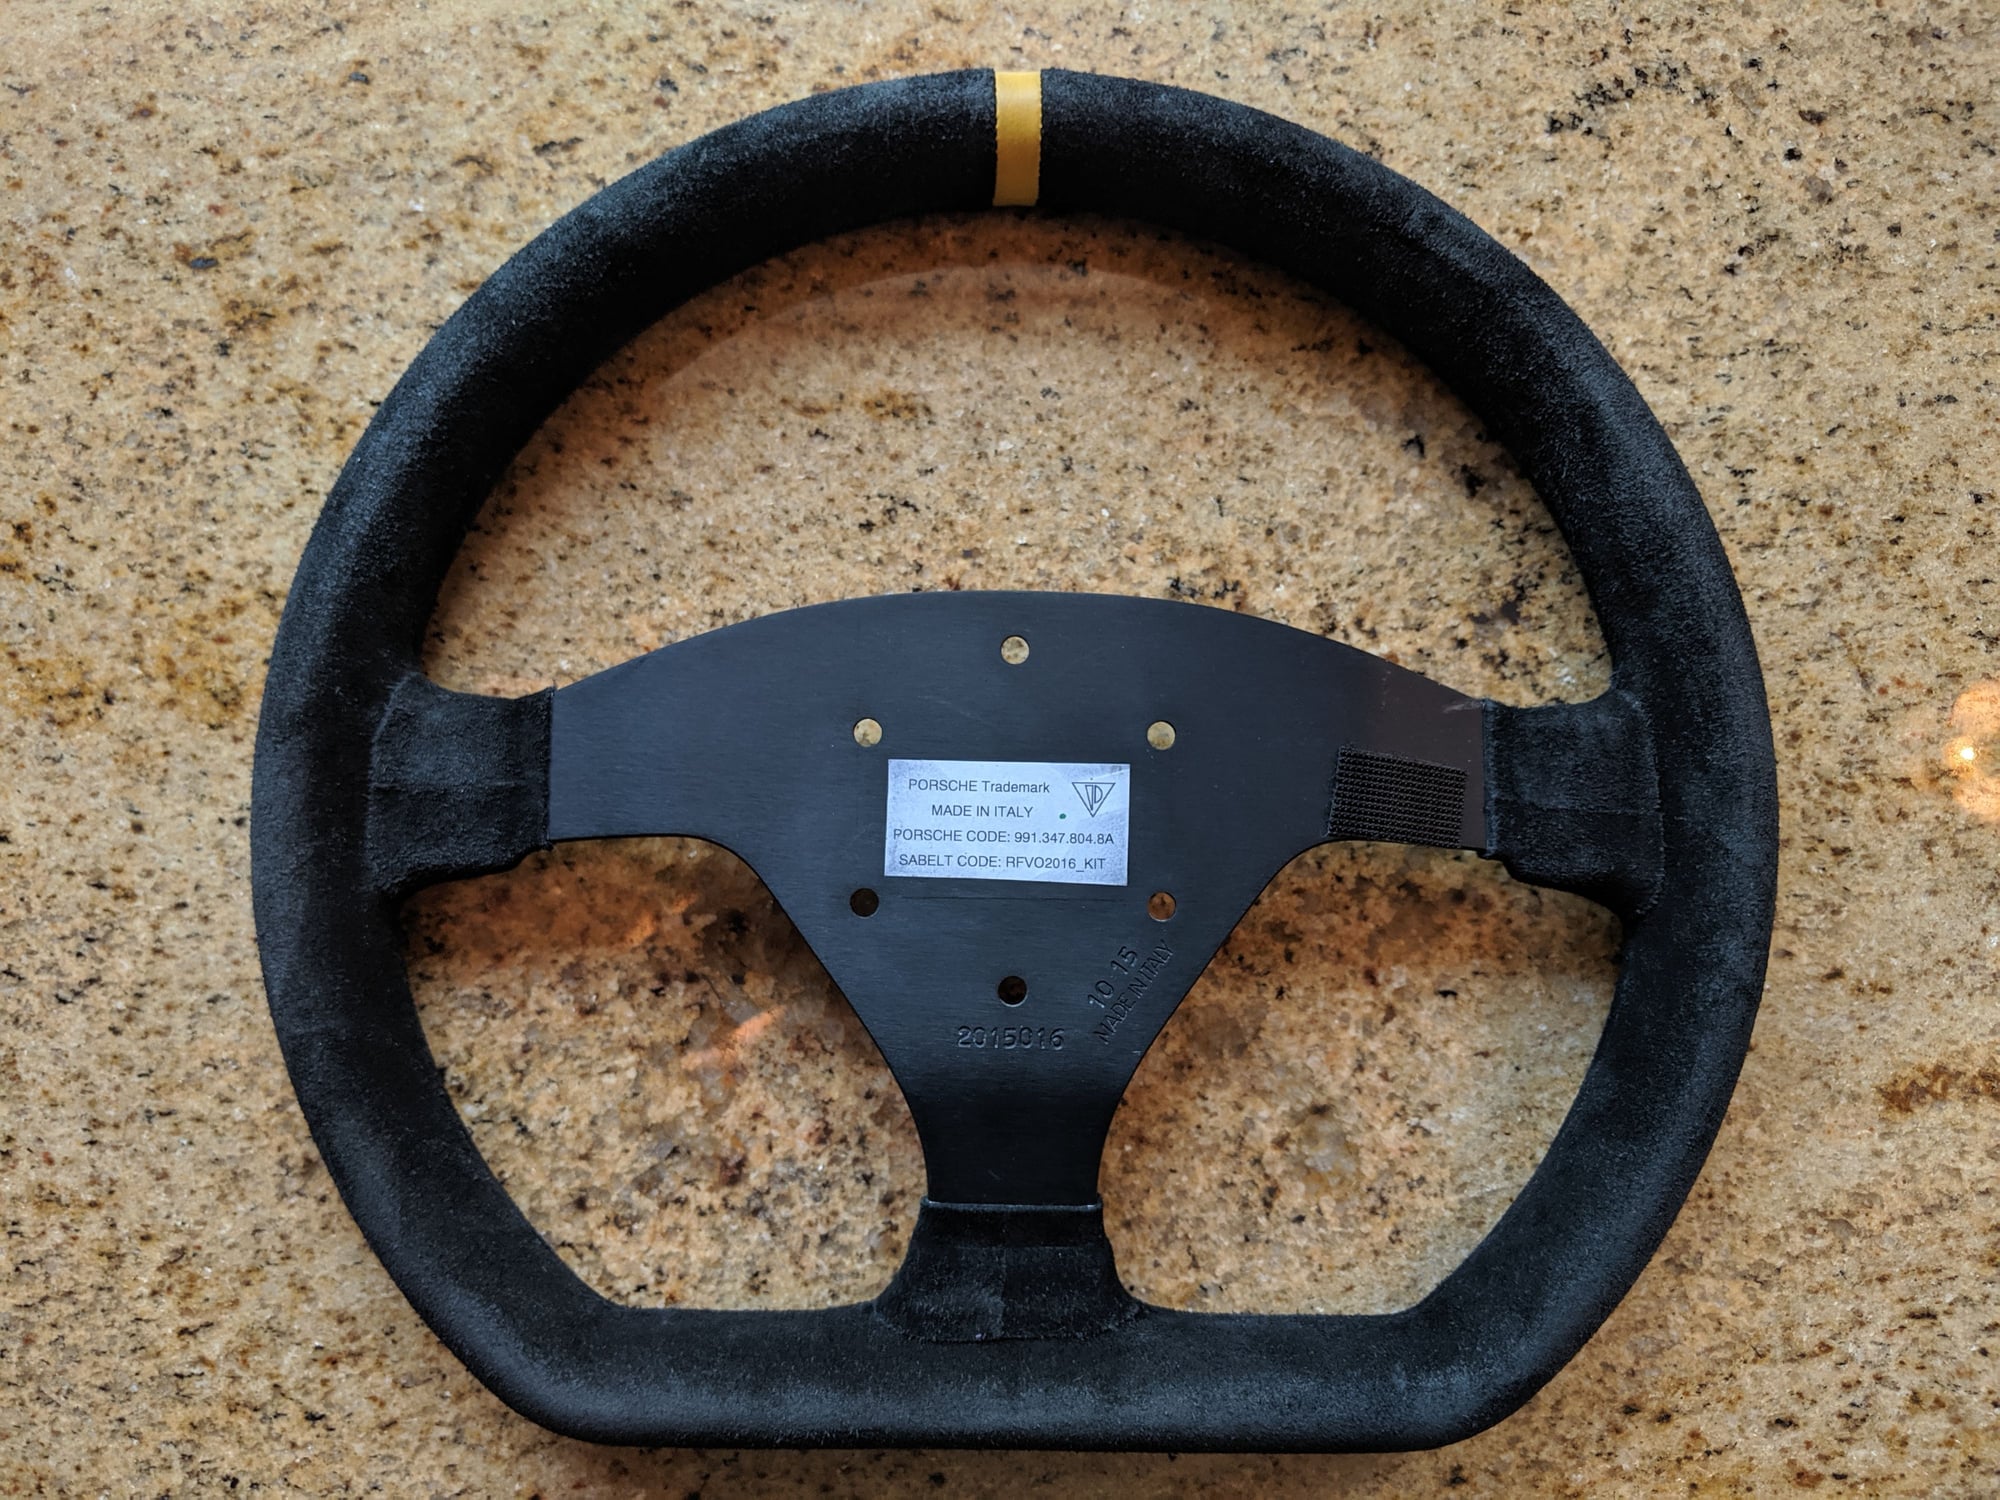 Steering/Suspension - 991 911 Cup Steering Wheel | Good condition - Used - Millville, NJ 08332, United States